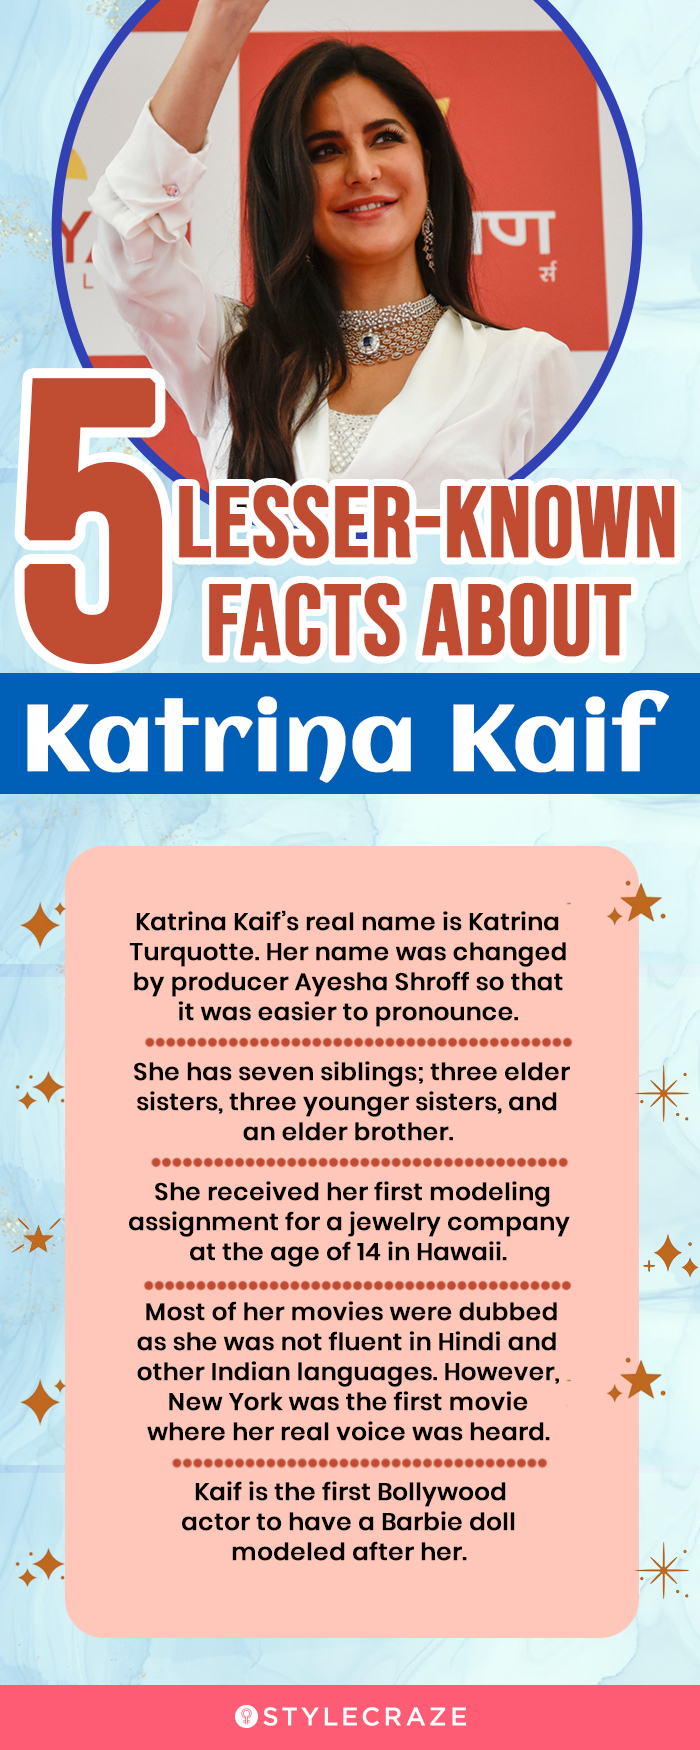 5 lesser known facts about katrina kaif (infographic)